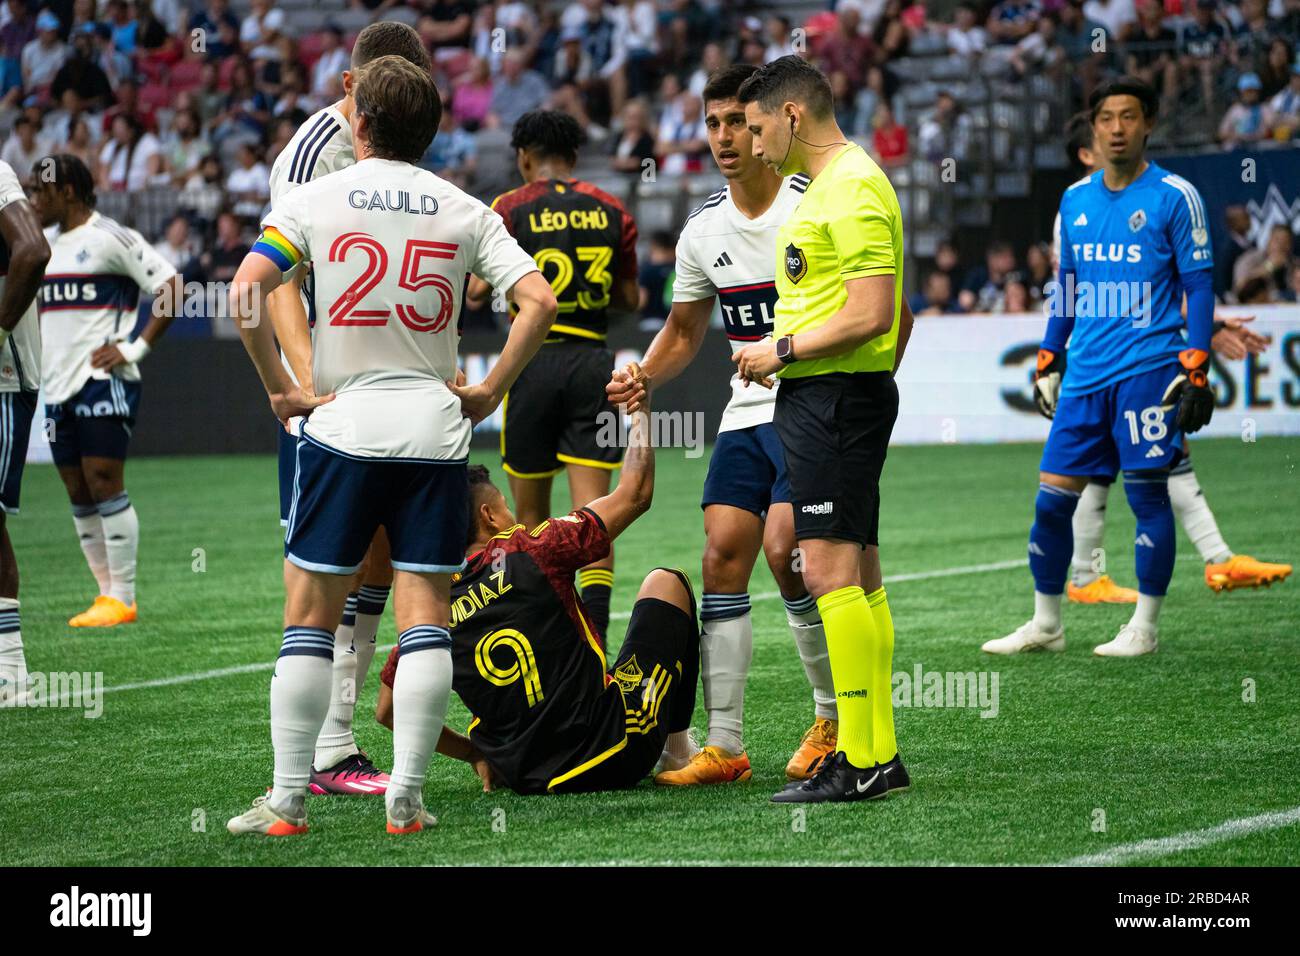 Vancouver, Canada. 08th July, 2023. Vancouver, British Columbia, Canada, July 8th 2023: Mathias Laborda (2 Vancouver Whitecaps FC) helps up Raul Ruidiaz (9 Seattle Sounders FC) after he falls during the Major League Soccer match between Vancouver Whitecaps FC and Seattle Sounders FC at BC Place Stadium in Vancouver, British Columbia, Canada (EDITORIAL USAGE ONLY). (Amy Elle/SPP) Credit: SPP Sport Press Photo. /Alamy Live News Stock Photo